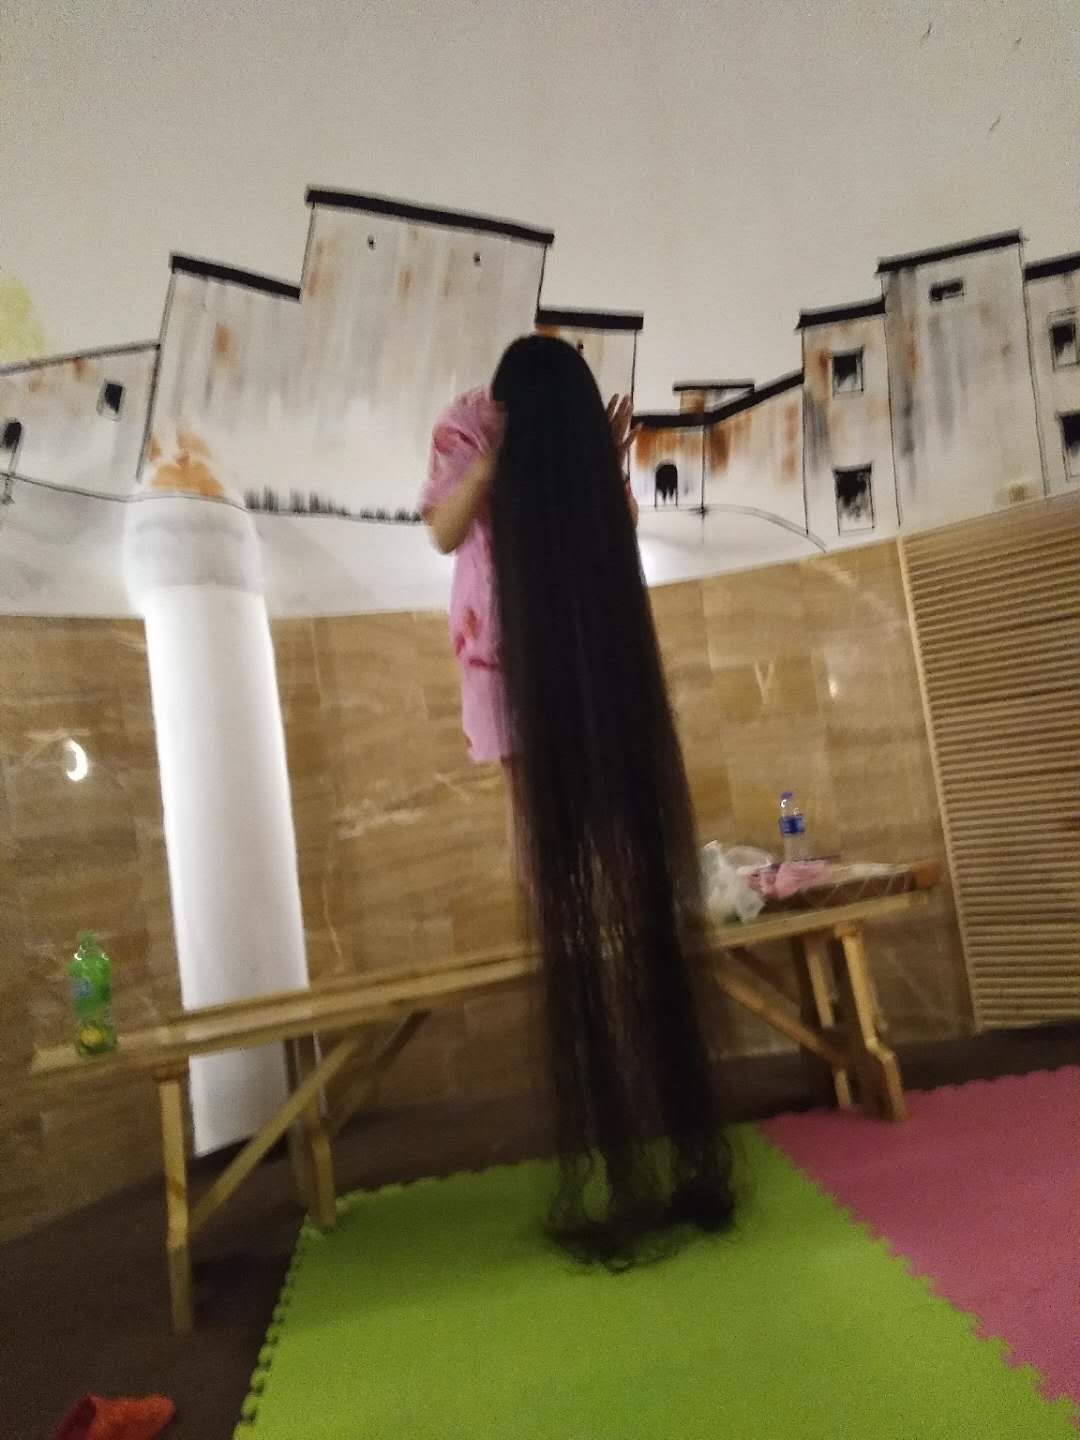 She stands on table with long hair drag on ground